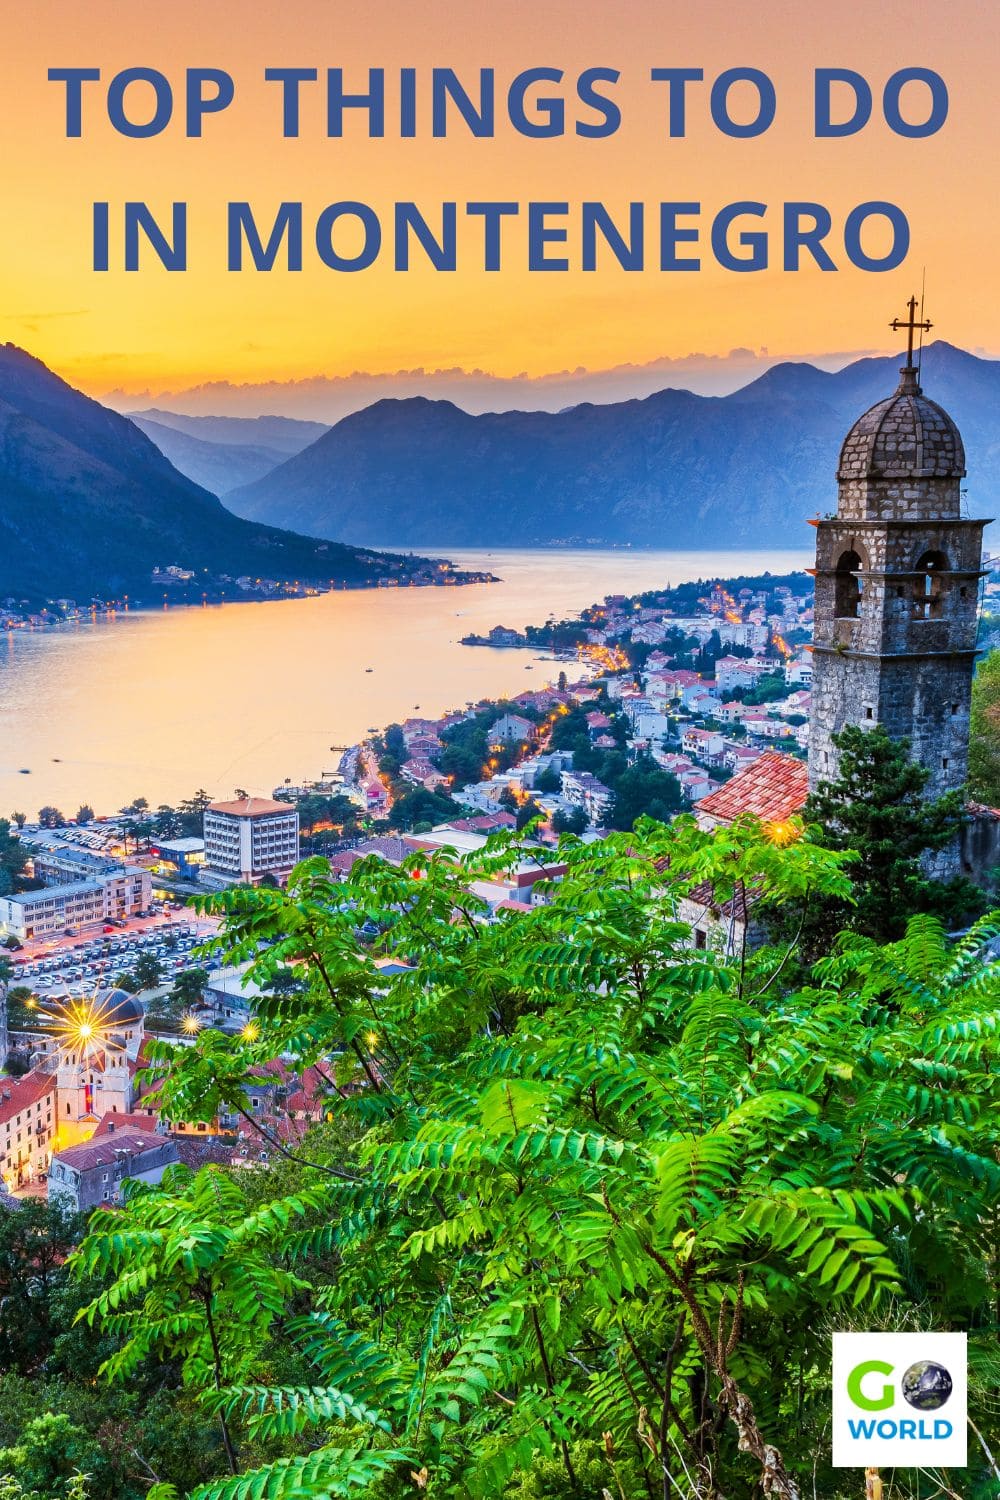 Top things to do in Montenegro include phenomenal hikes, exploring national parks and caves, relaxing on the beach and visiting monasteries. #montenegro